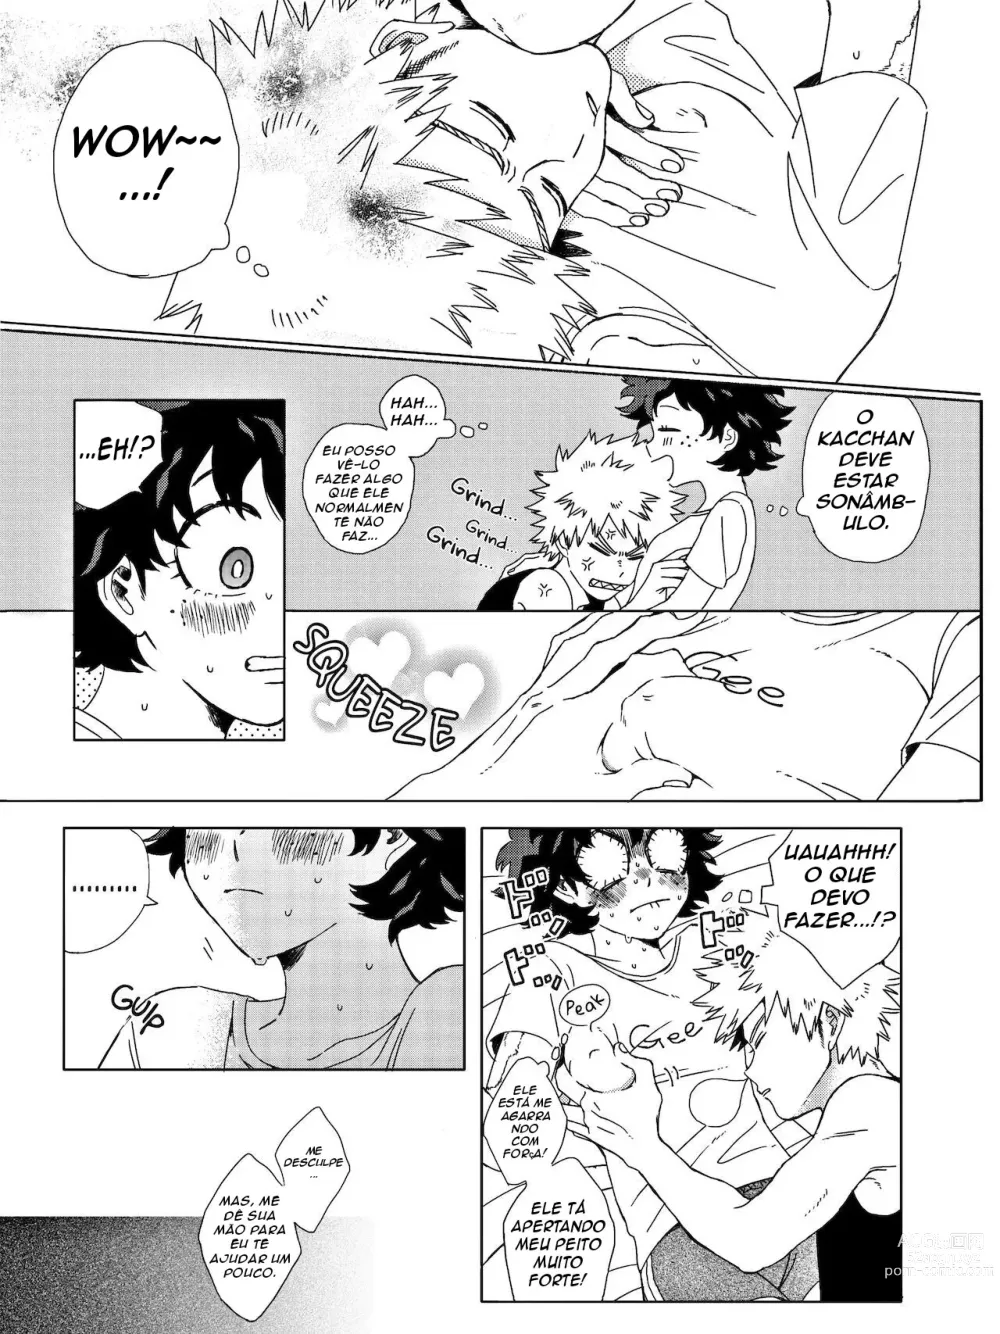 Page 6 of doujinshi The Thin Line Between Masturbation and Doing It [SpookyLatte] PT-BR